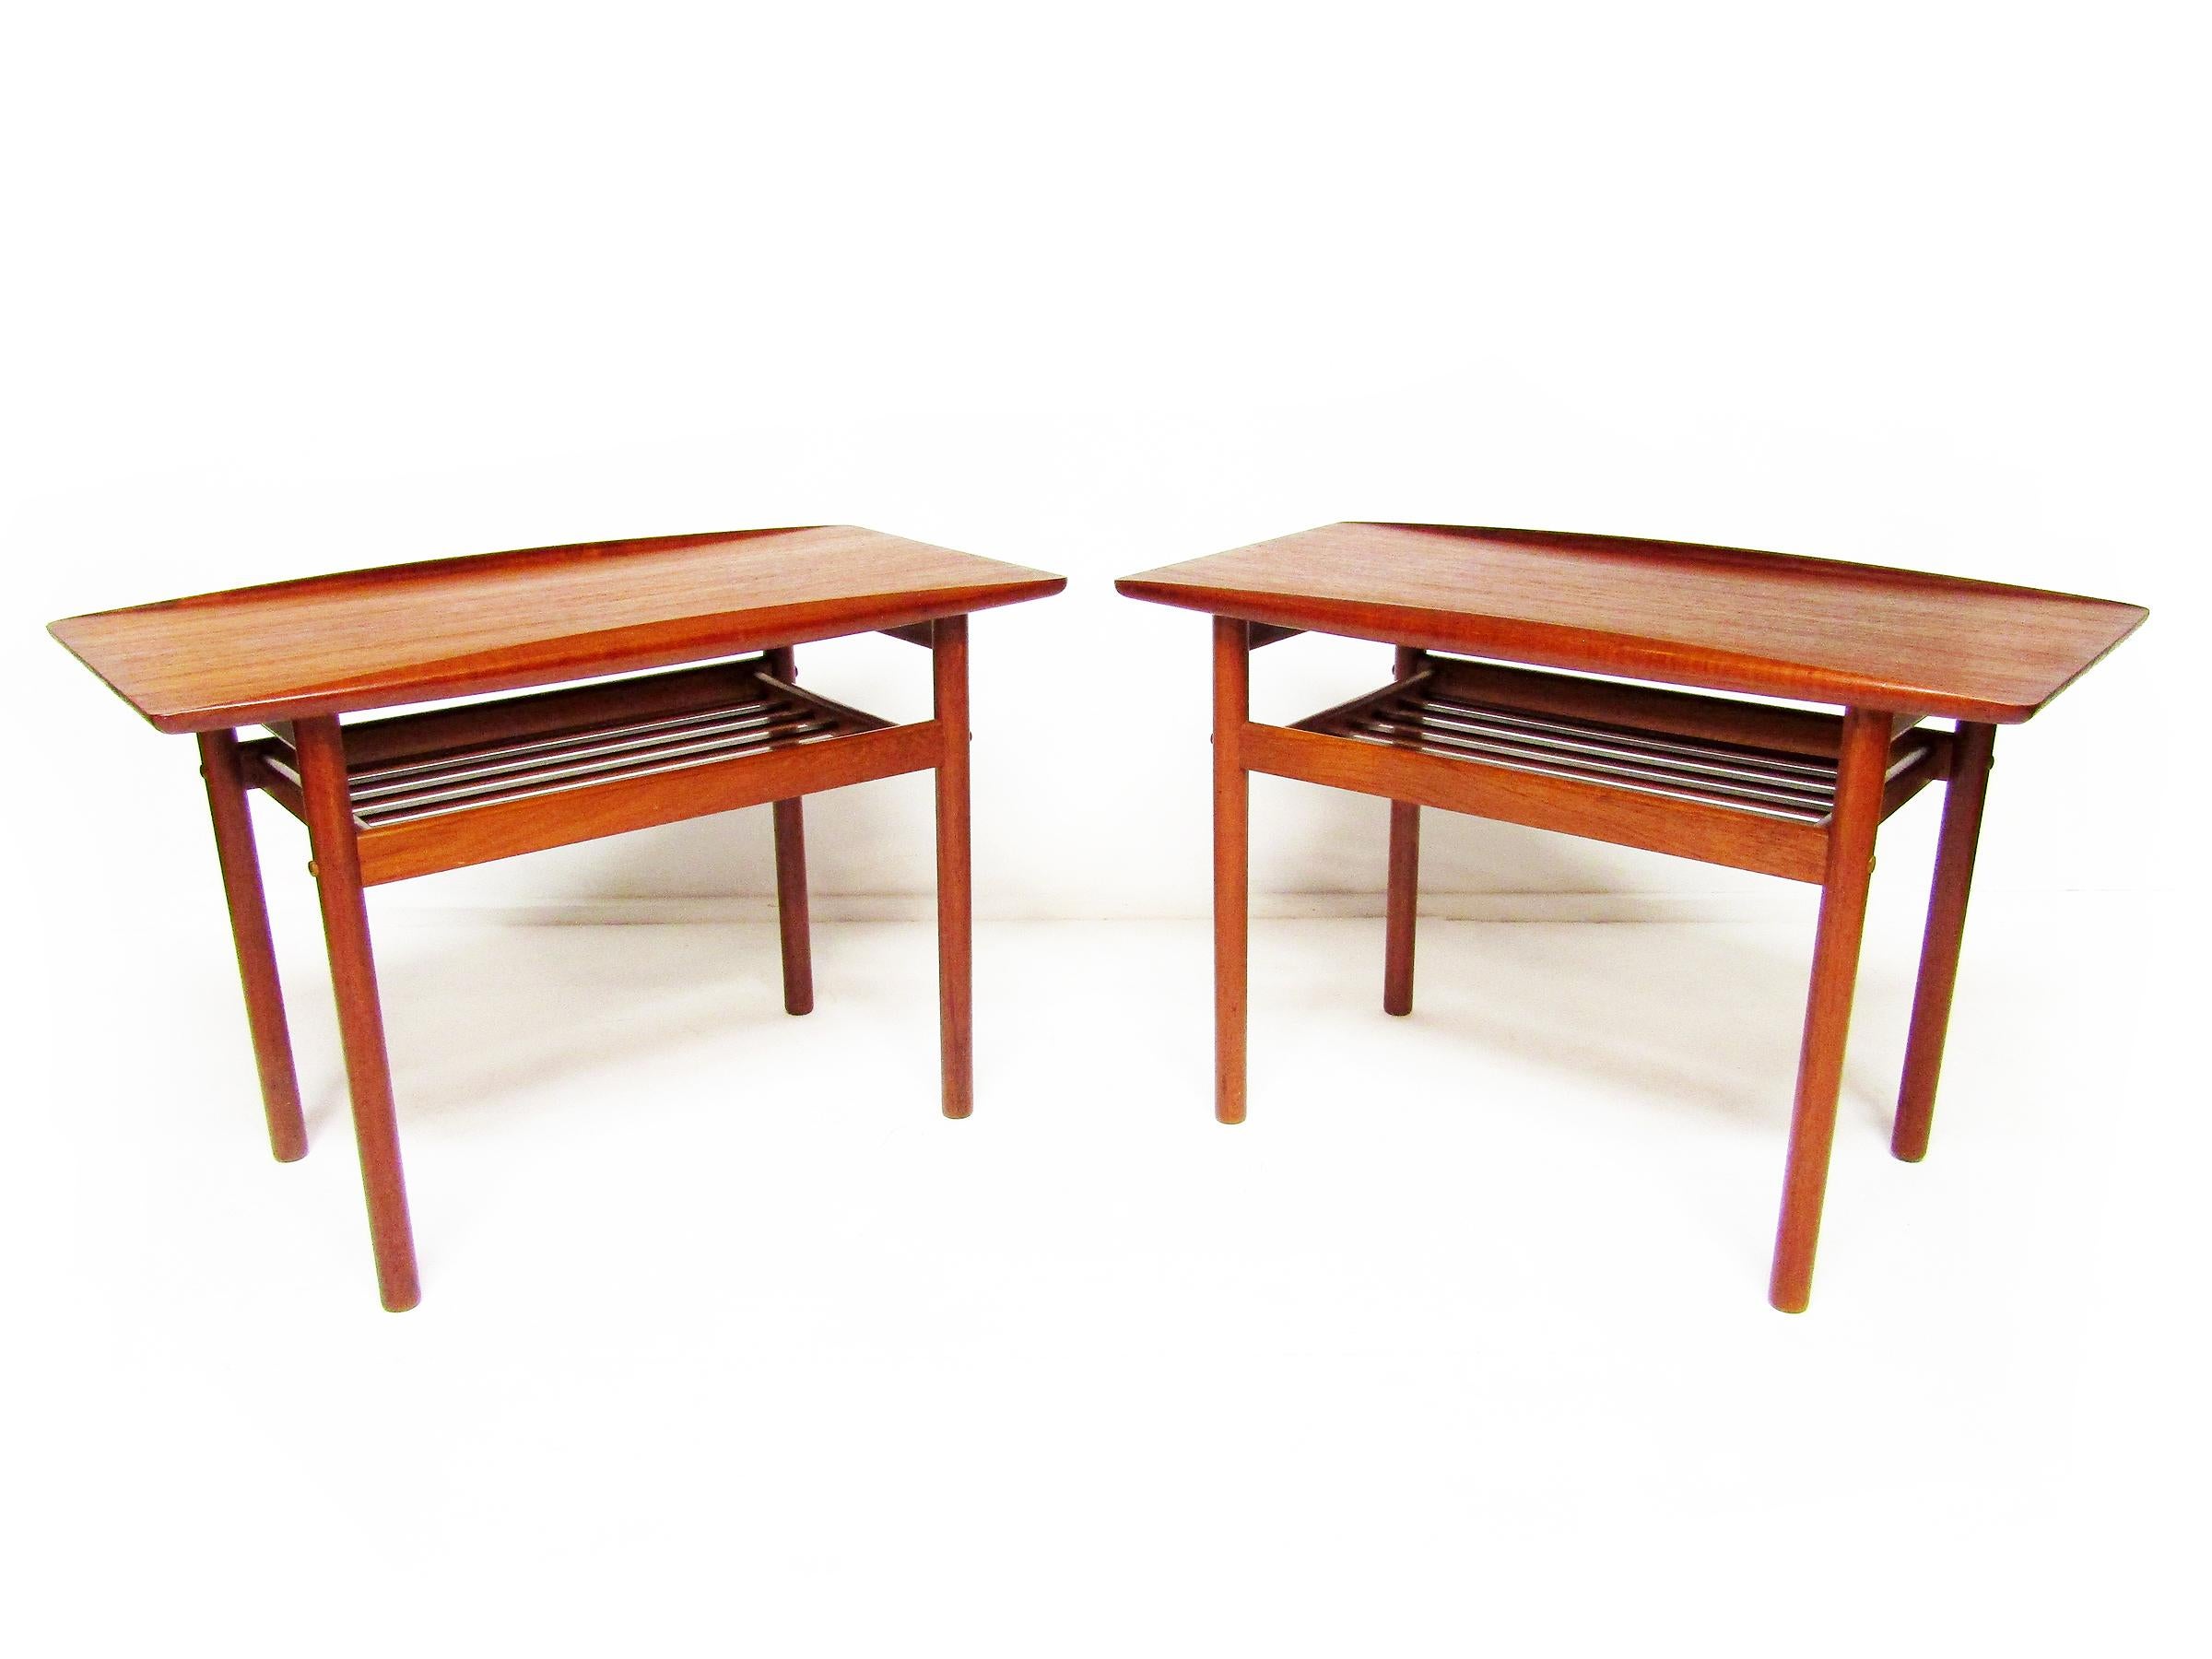 Pair Of Danish Surfboard Lamp Tables Or Night Stands In Teak By Grete Jalk In Good Condition For Sale In Shepperton, Surrey